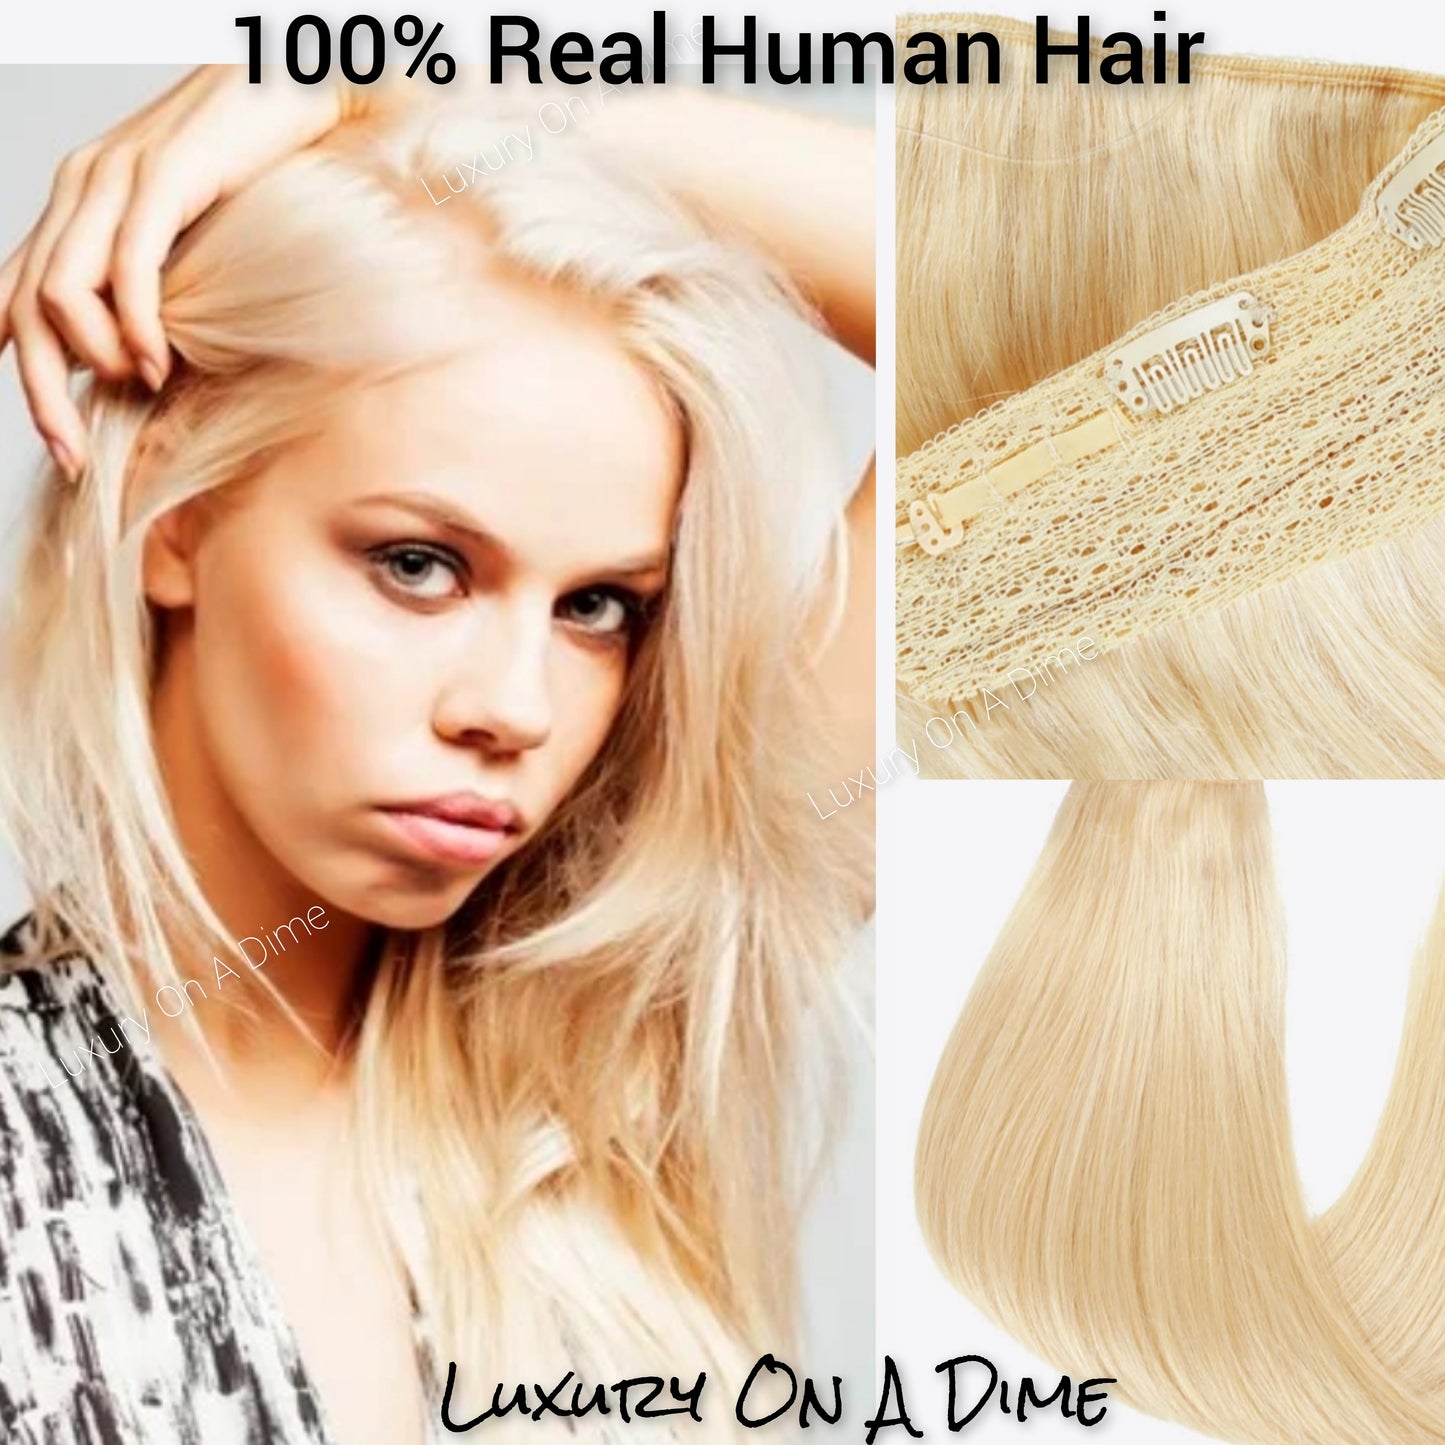 18" HUMAN INDIAN HAIR 80g Halo Extention Real Premium